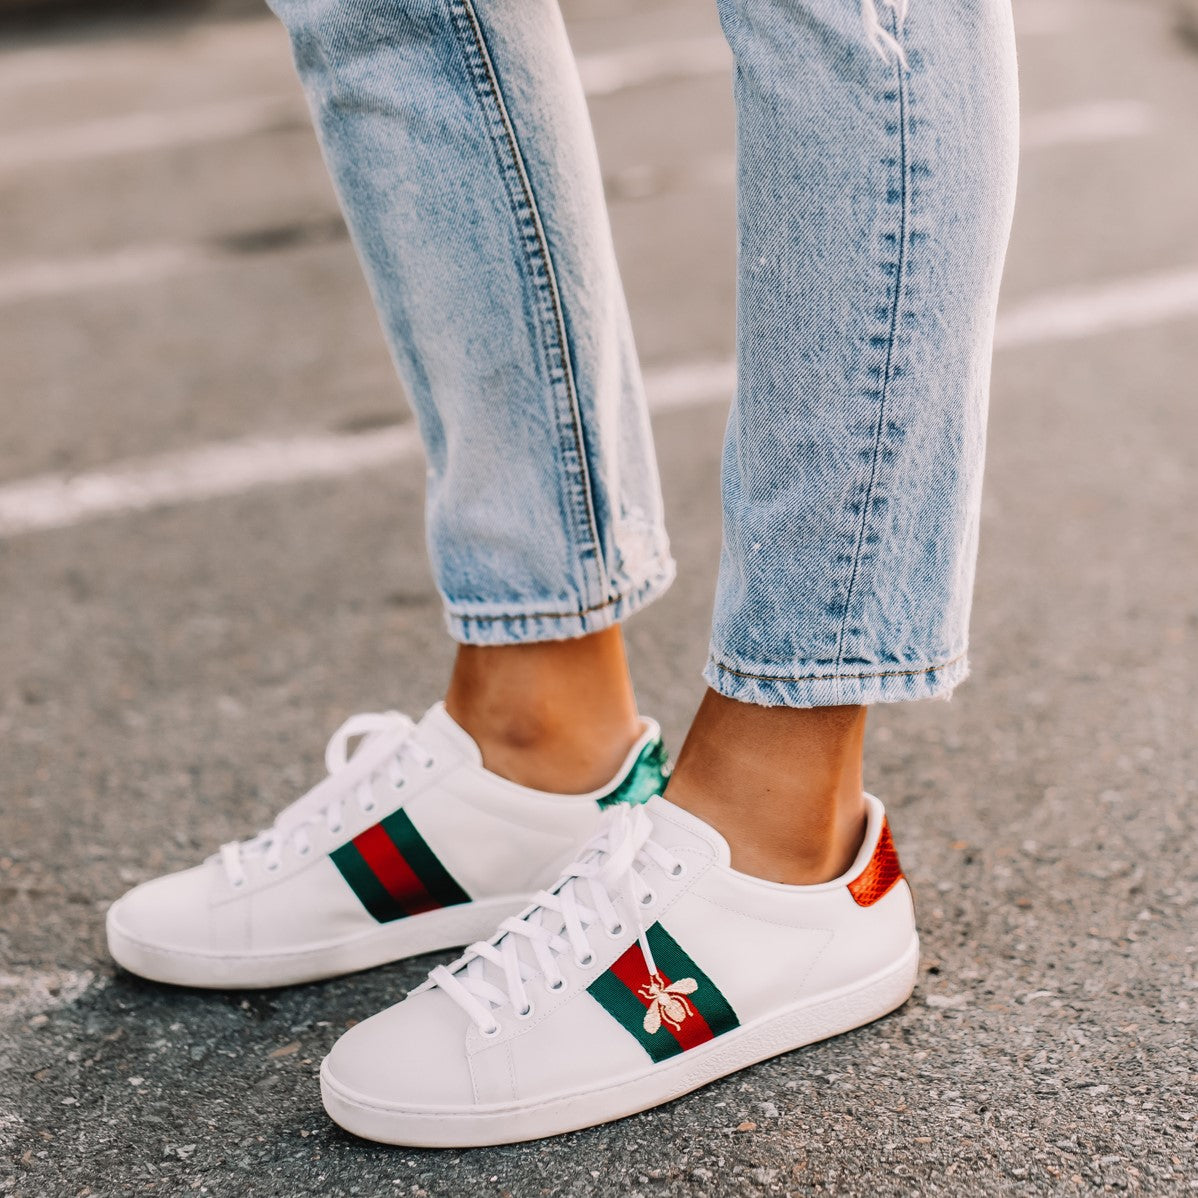 How To Spot Real Vs Fake Gucci Ace Sneakers – LegitGrails